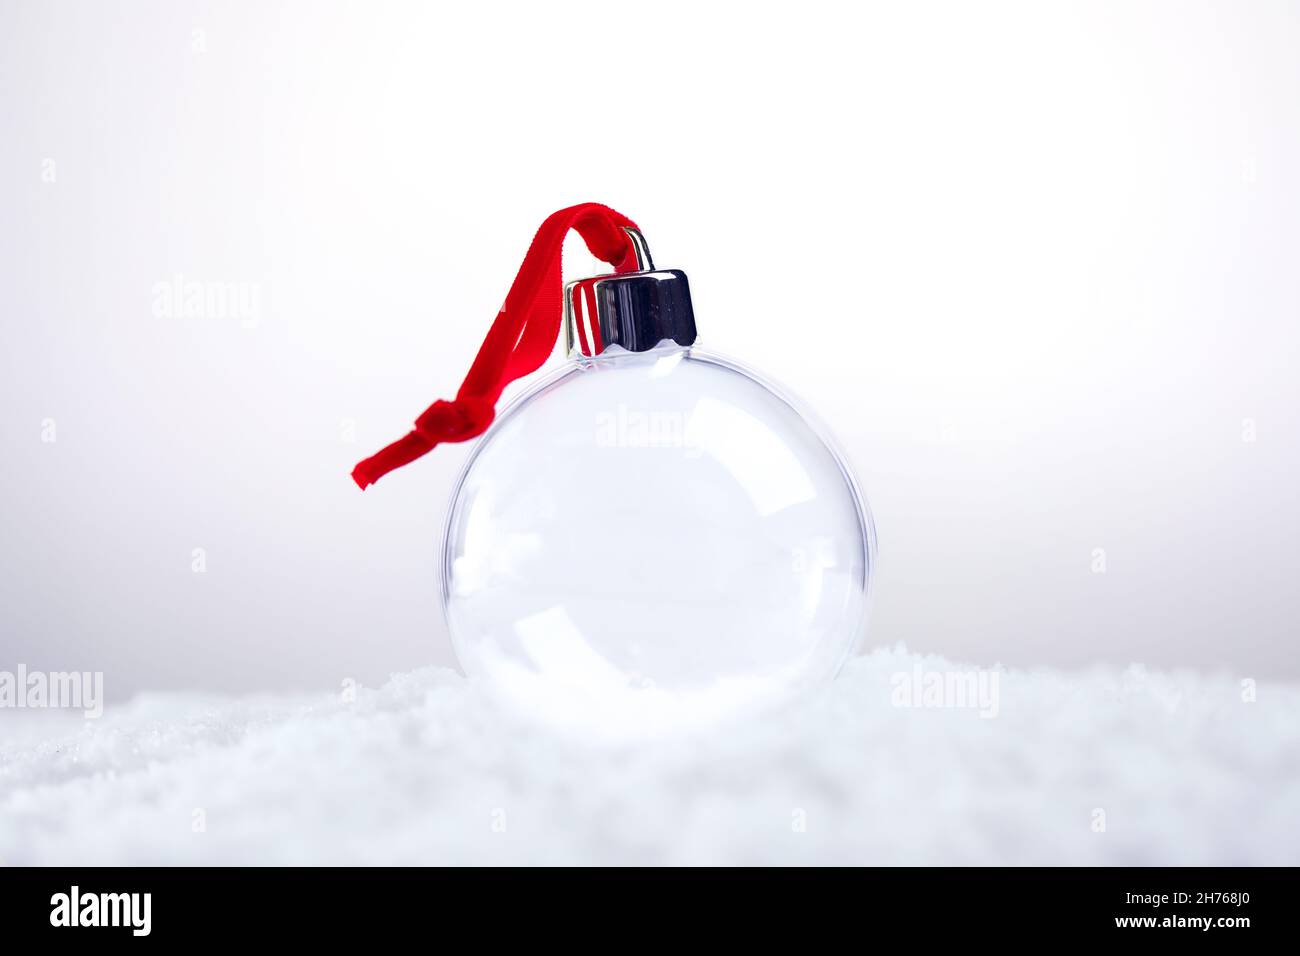 Clear empty Christmas ornament with red ribbon sitting in snow Stock Photo